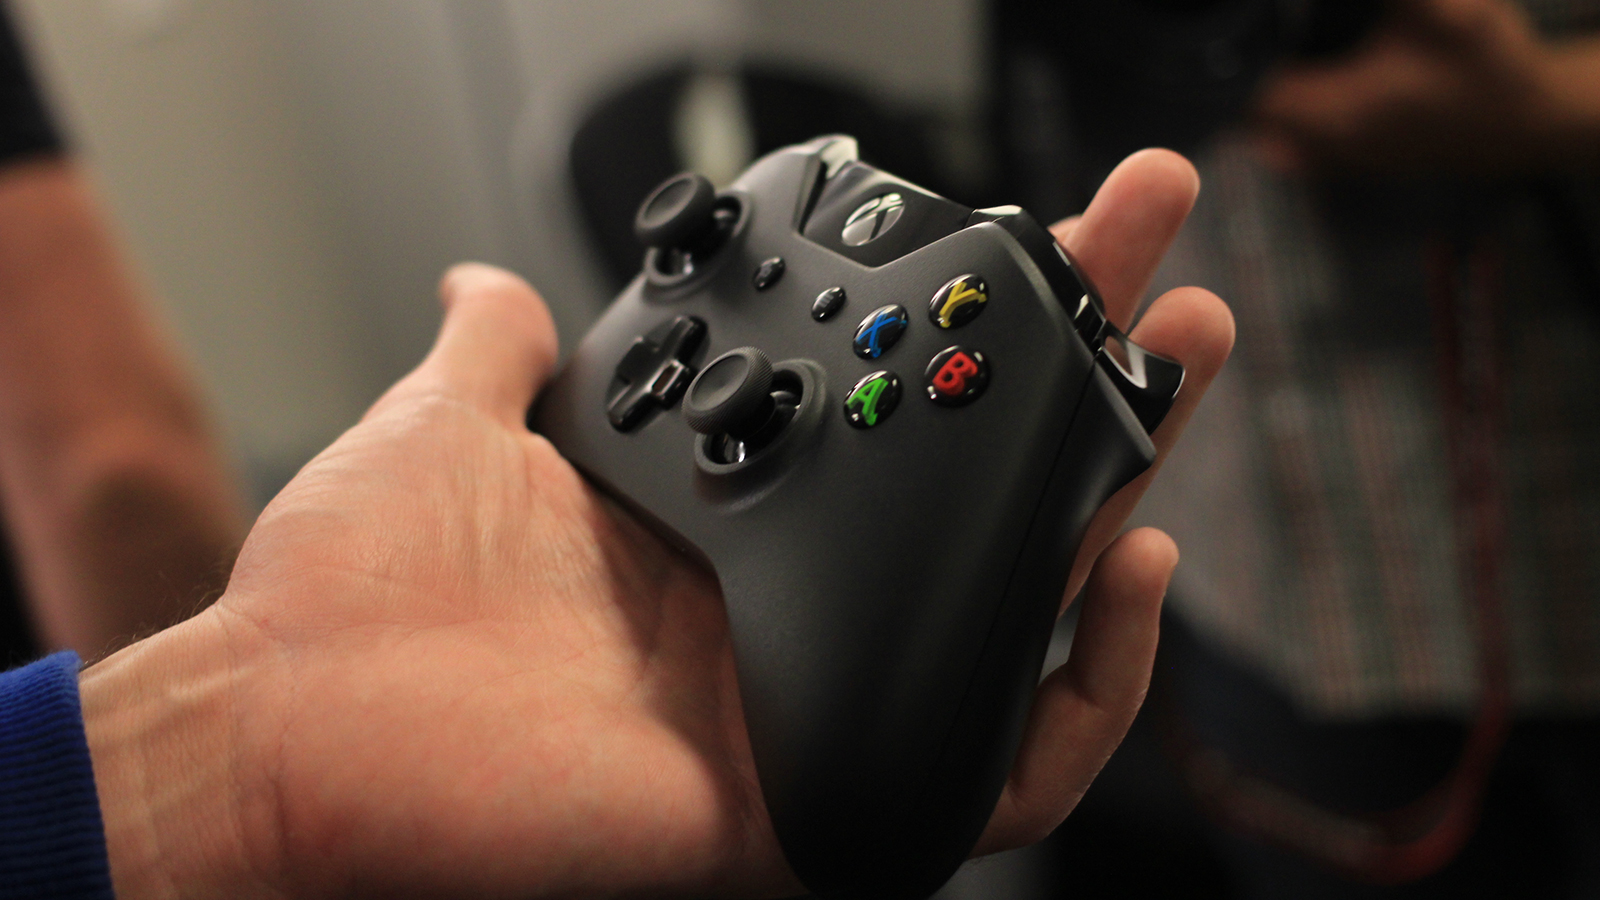 Xbox One Controller Hands-On: Rumbling Triggers Are Freaking Awesome